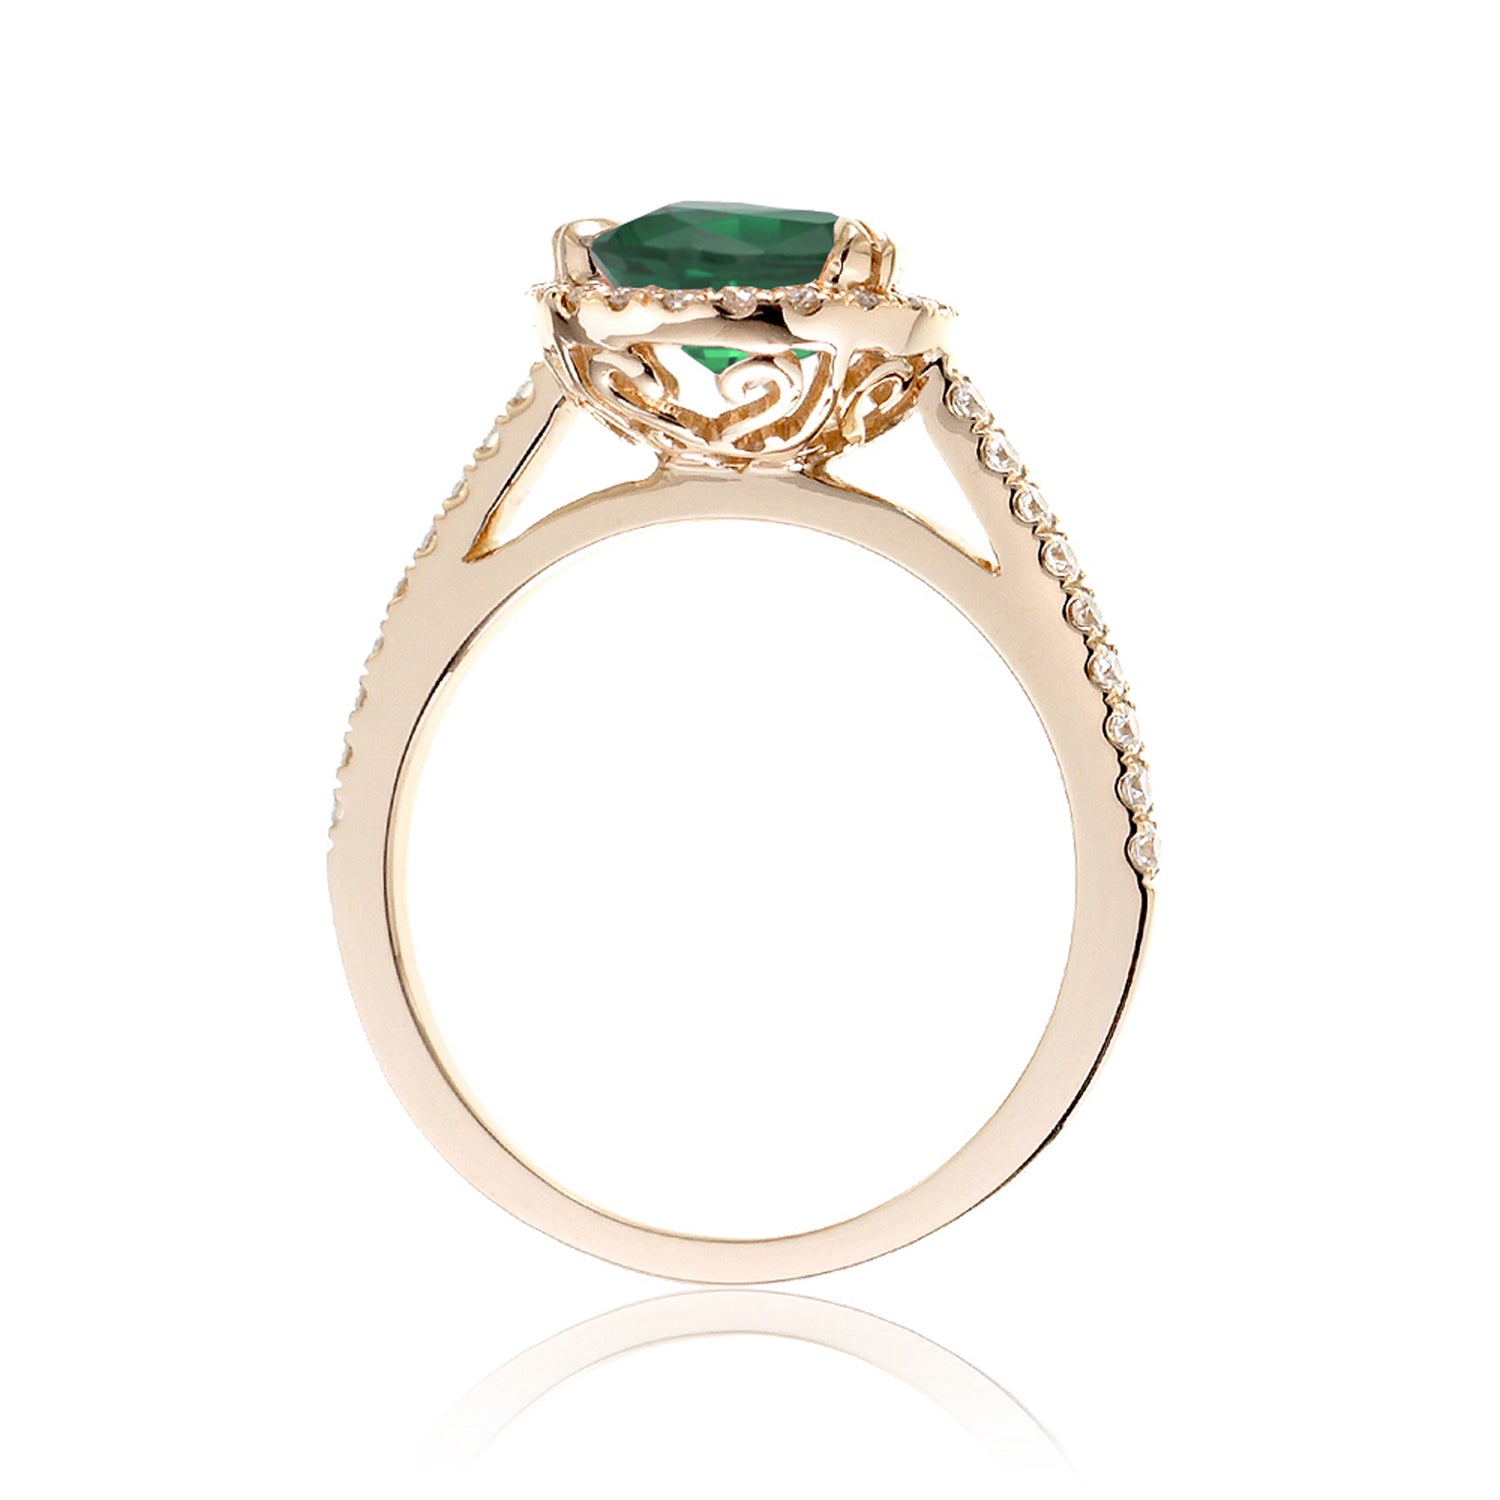 Pear green emerald diamond halo cathedral engagement ring yellow gold - The Signature